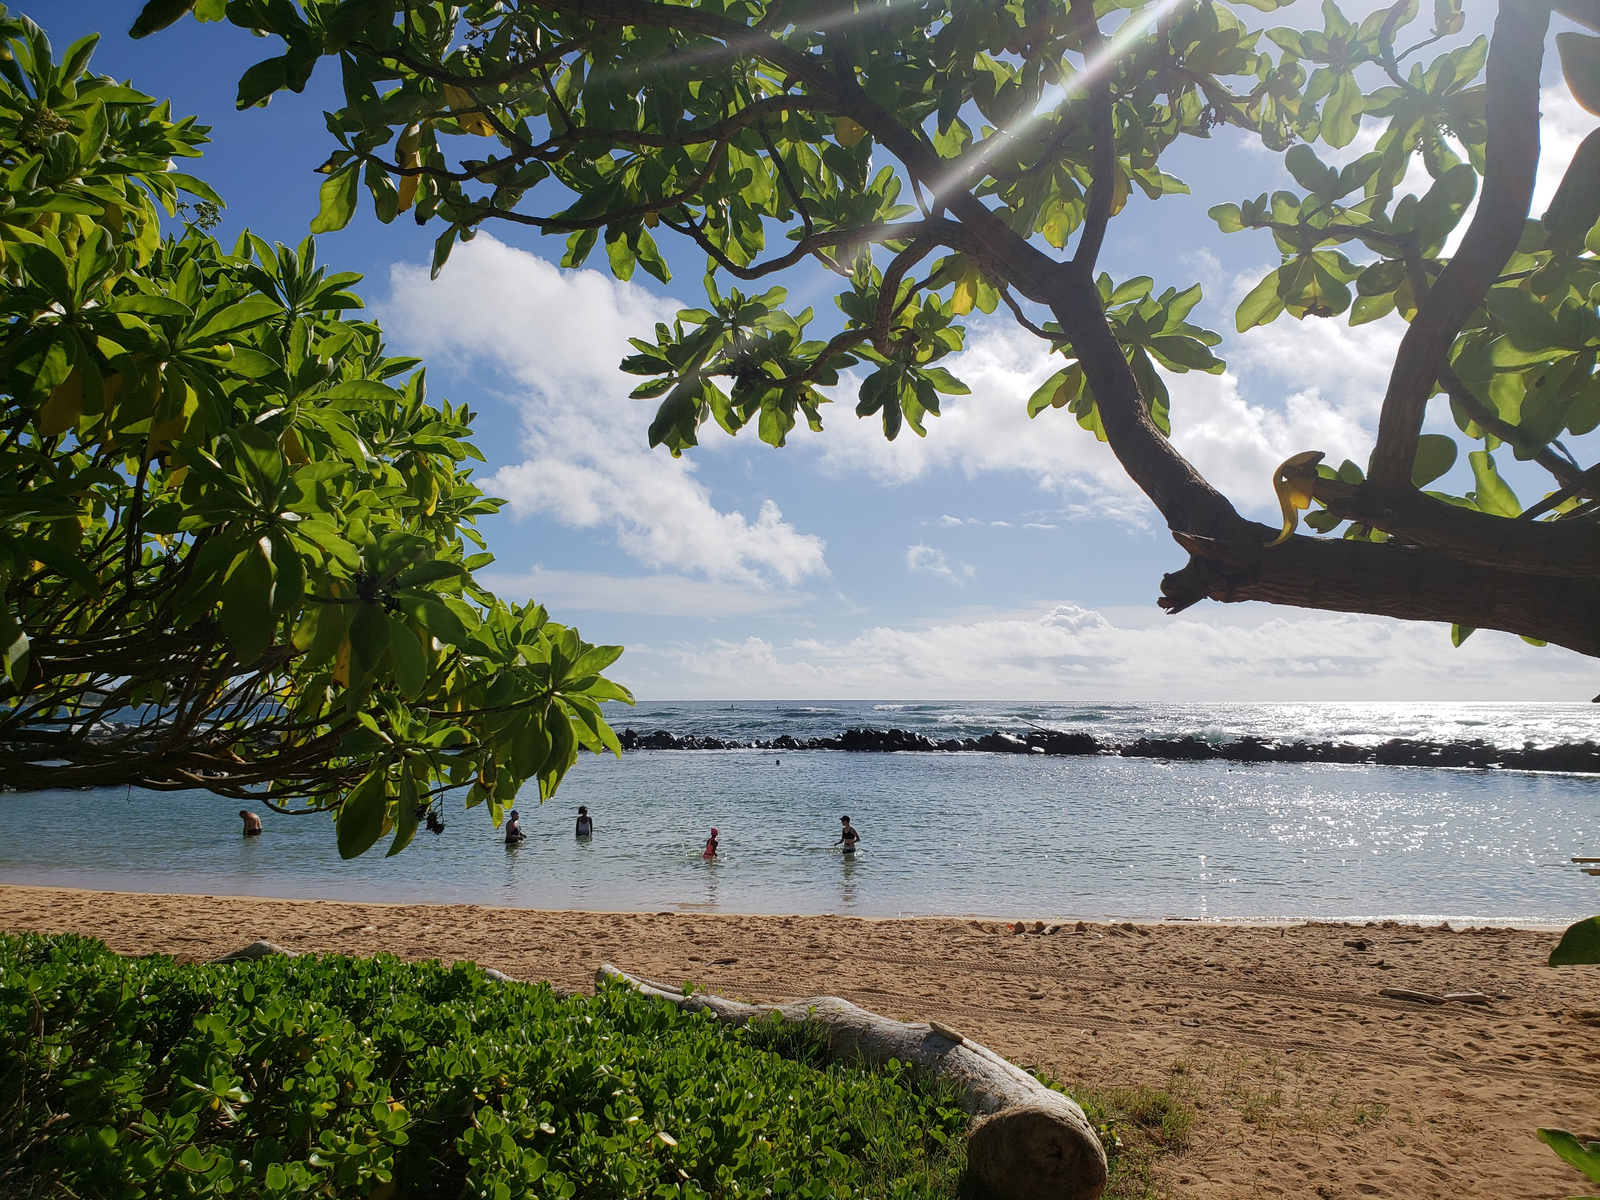 A family dipping in the calm waters of Lydgate Beach, a piece on the best snorkeling spots in Kauai, pictured behind a tree branch from the shore